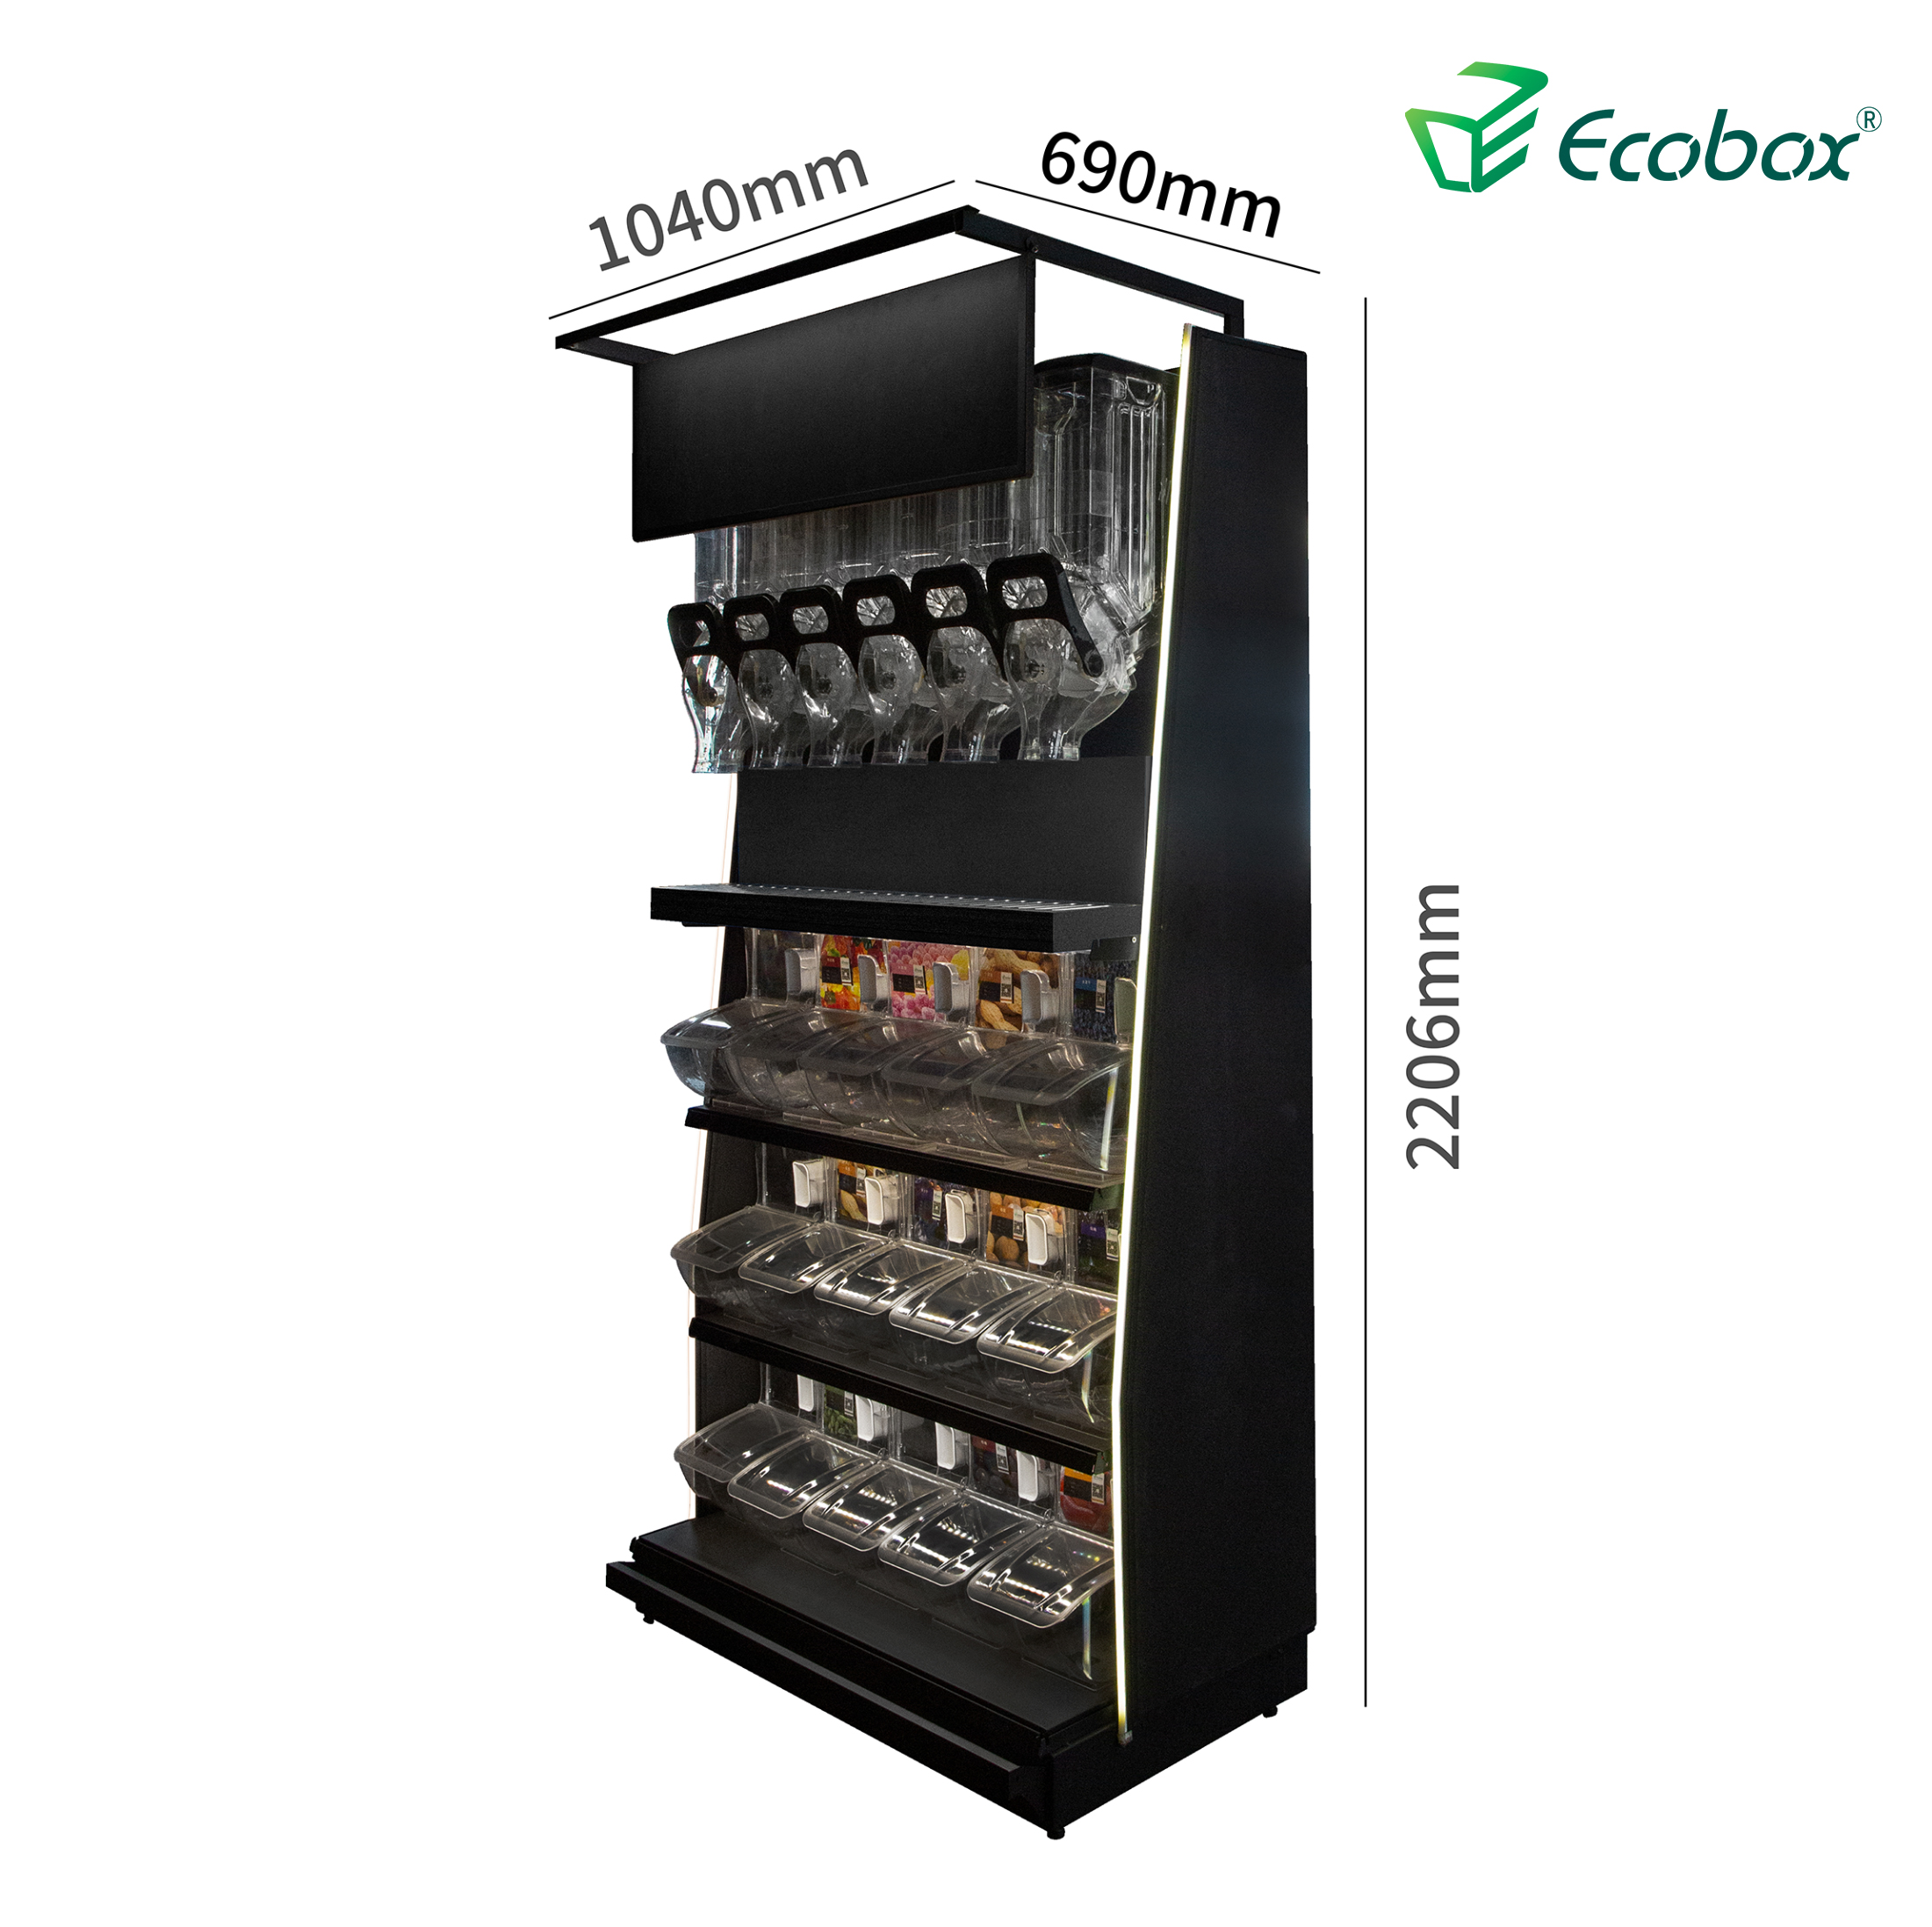 Ecobox TG-0615 Candy nuts display shelf pick n mix solution for bulk merchandising with gravity bin and scoop bins